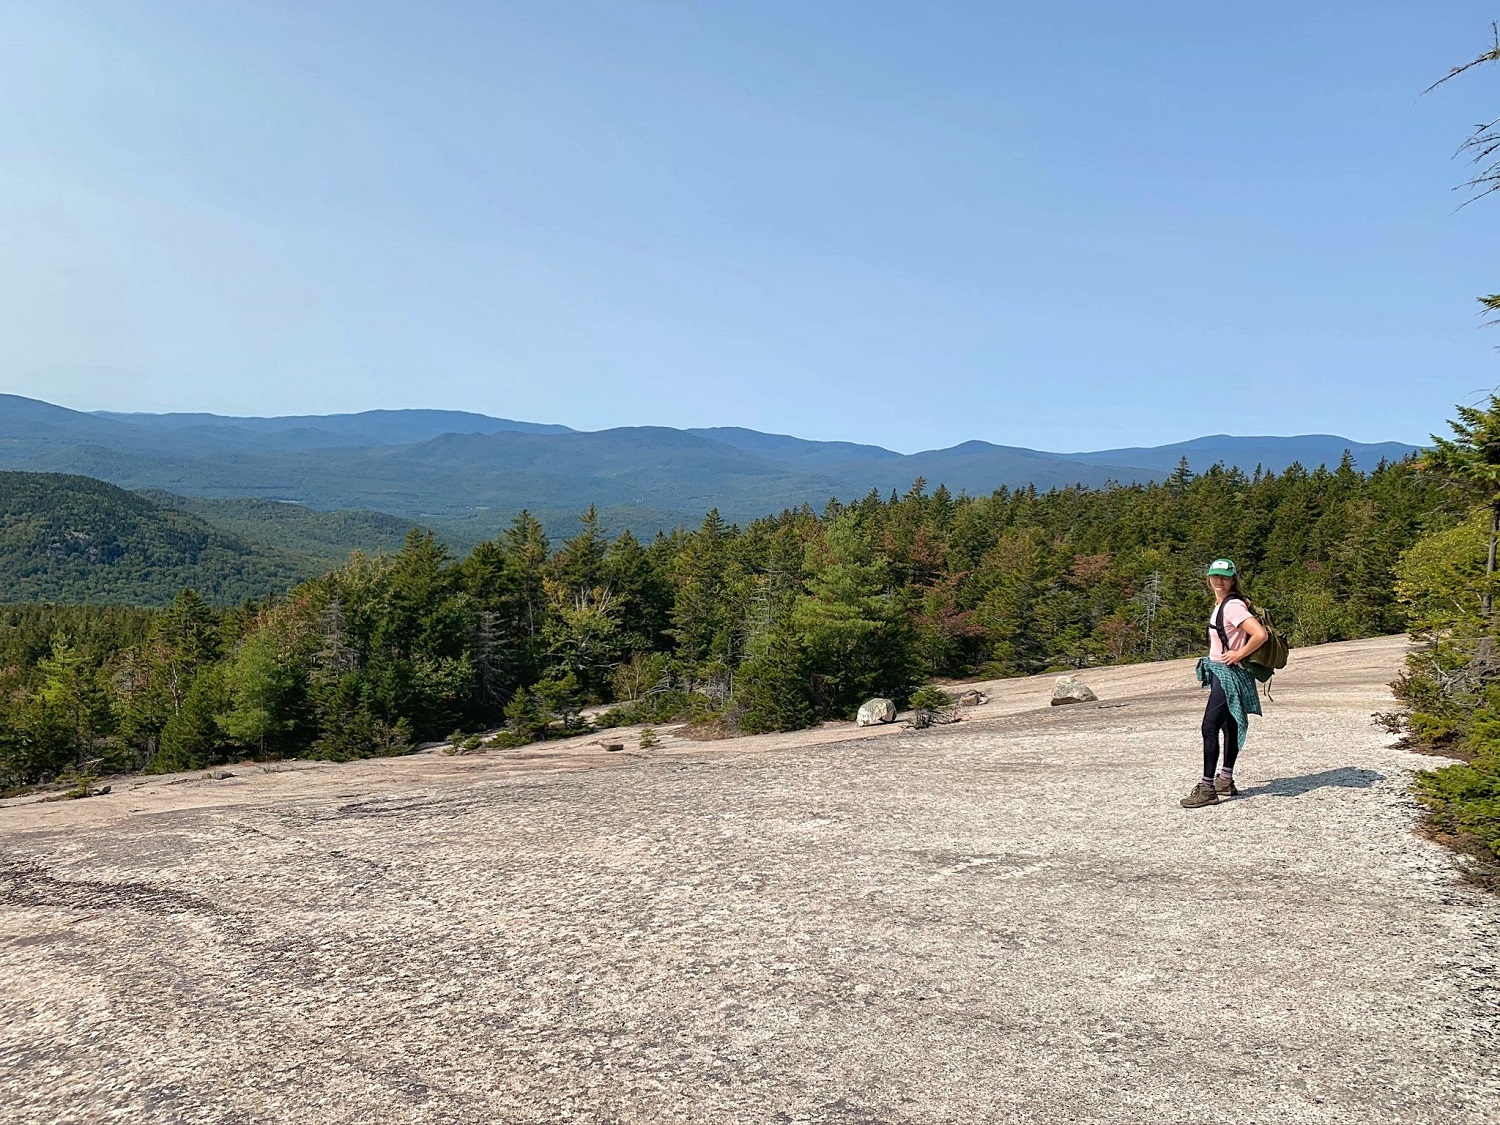 A Visit to the White Mountains and Lincoln, New Hampshire